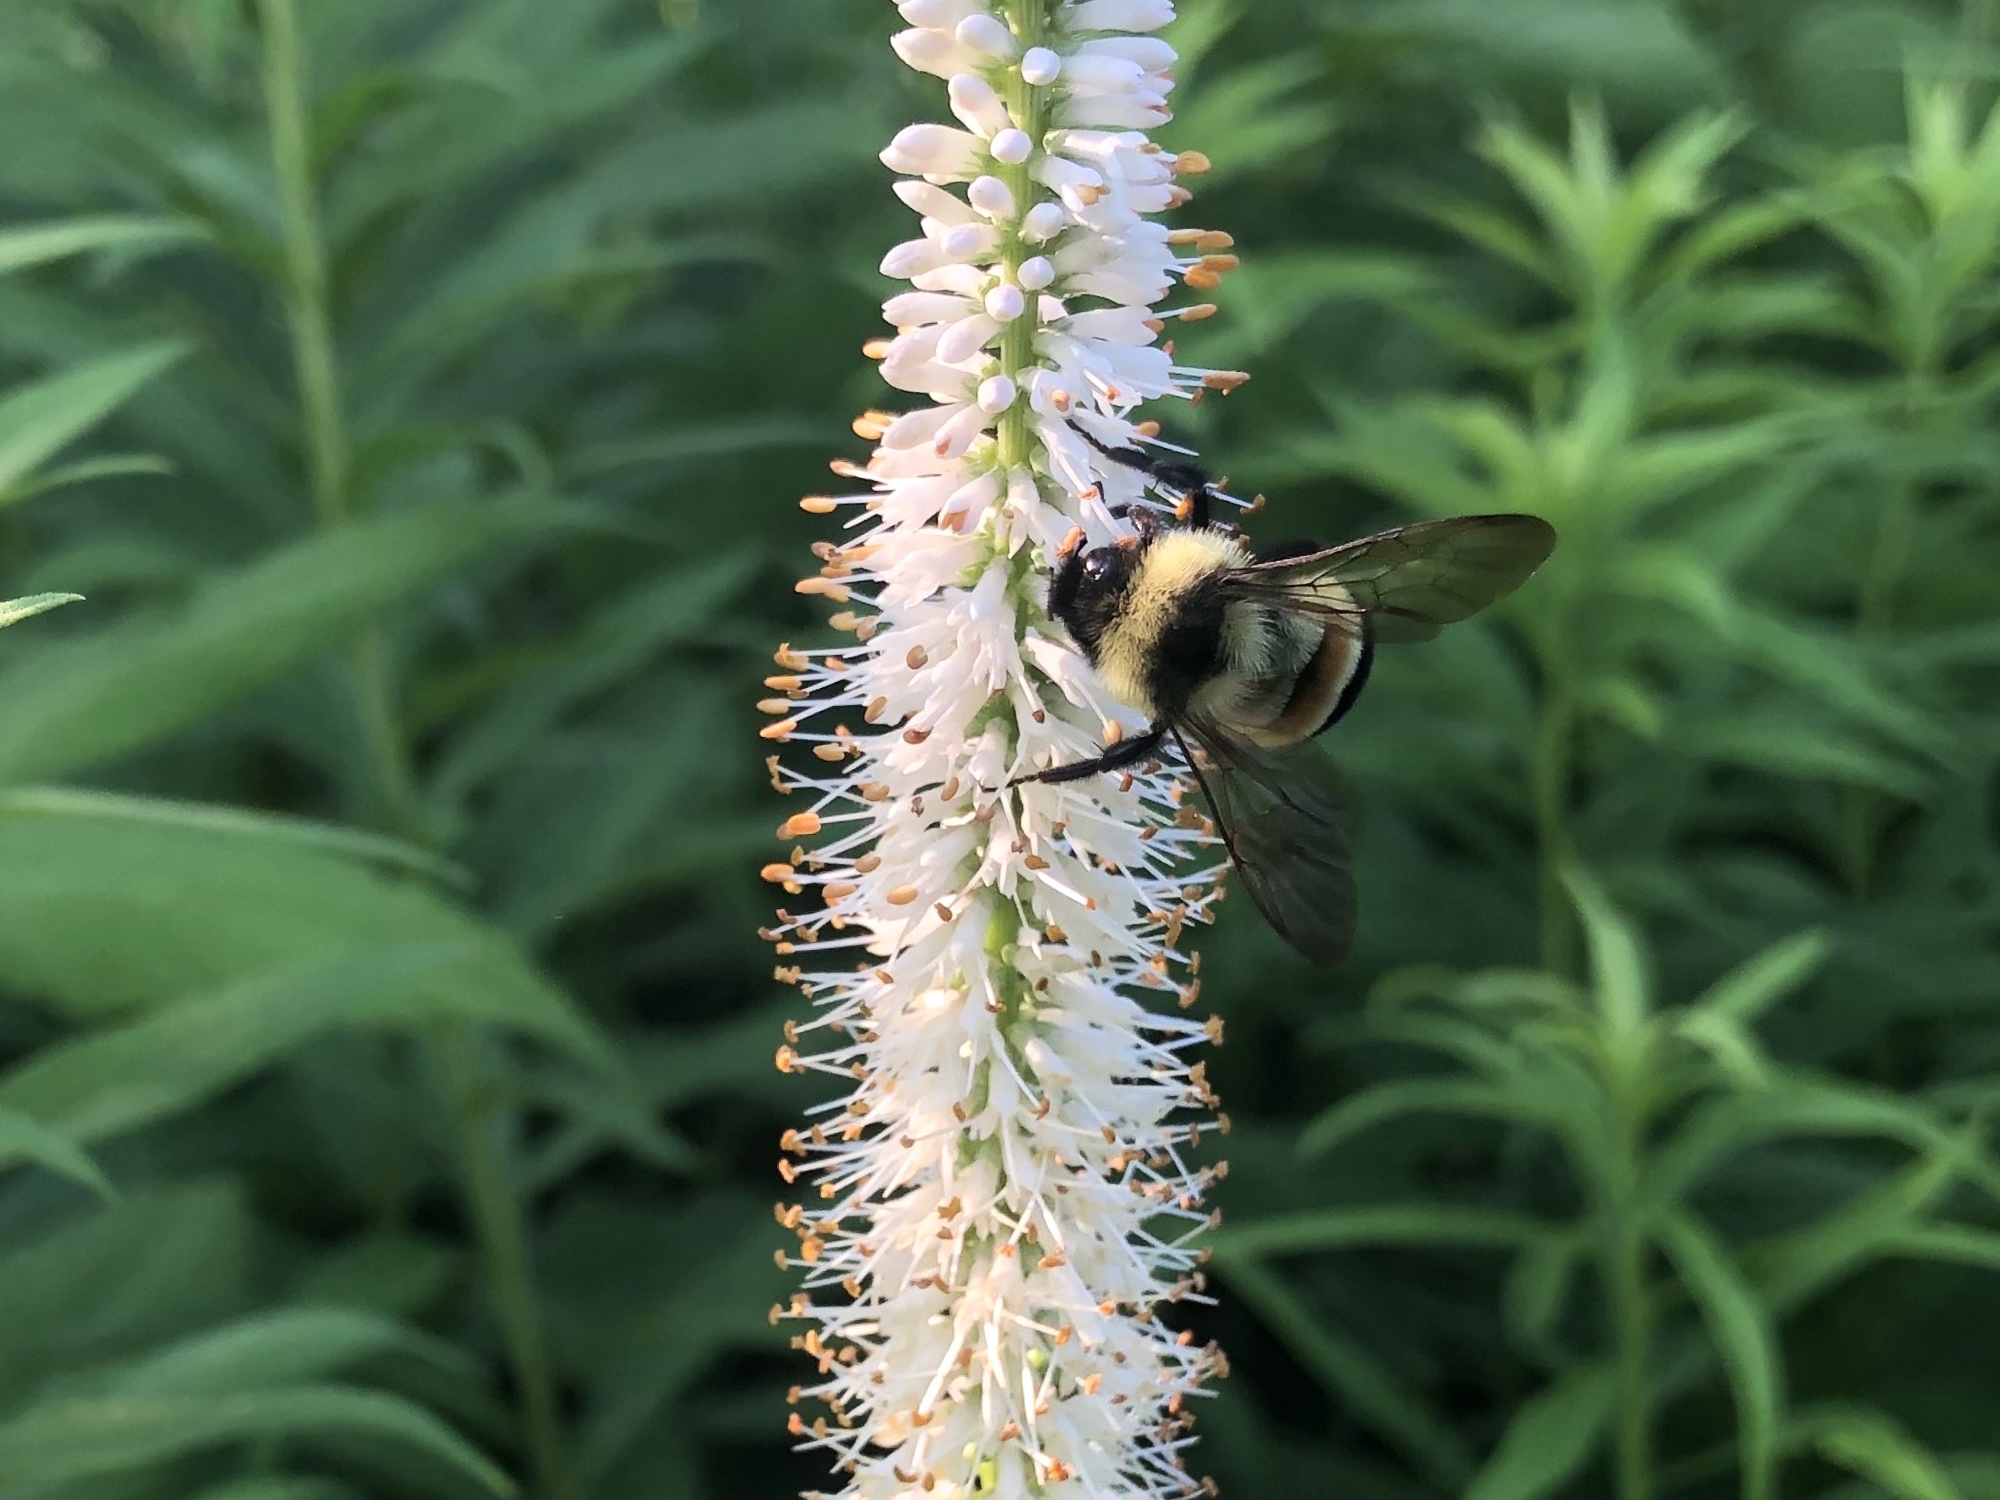 Rusty Patch Bumblebee on Culver's Root In Oak Savnanna in Madison, Wisconsin on July 6, 2021.